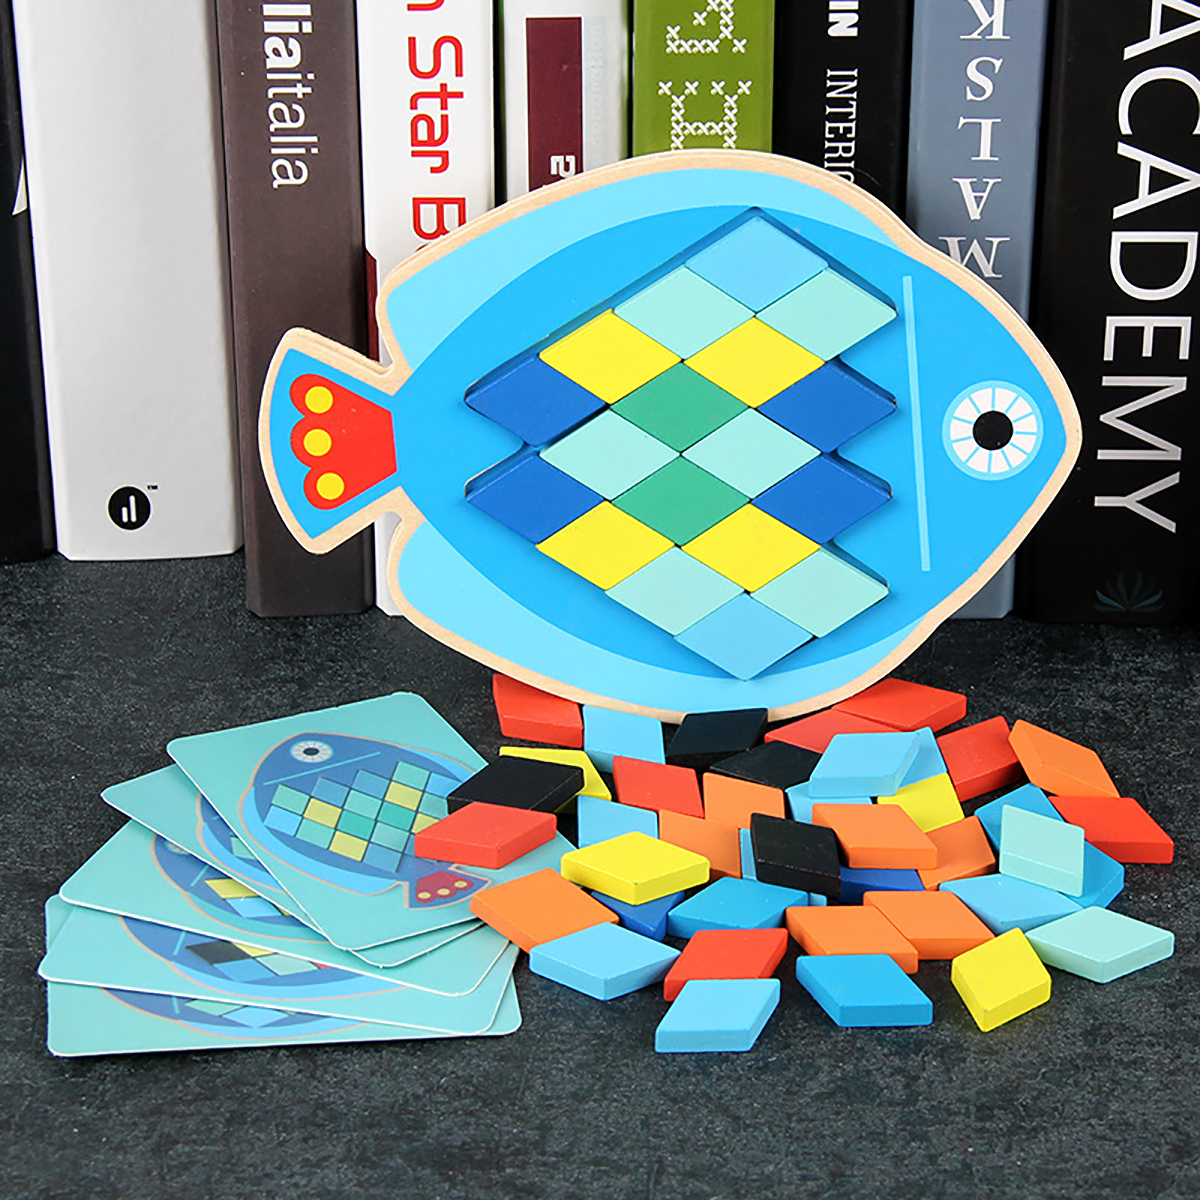 Wood-DIY-Assembly-Jigsaw-Puzzle-Toy-Colors-Shapes-Cartoon-Fish-Owl-Matching-Cards-Toy-for-Children-L-1682195-6